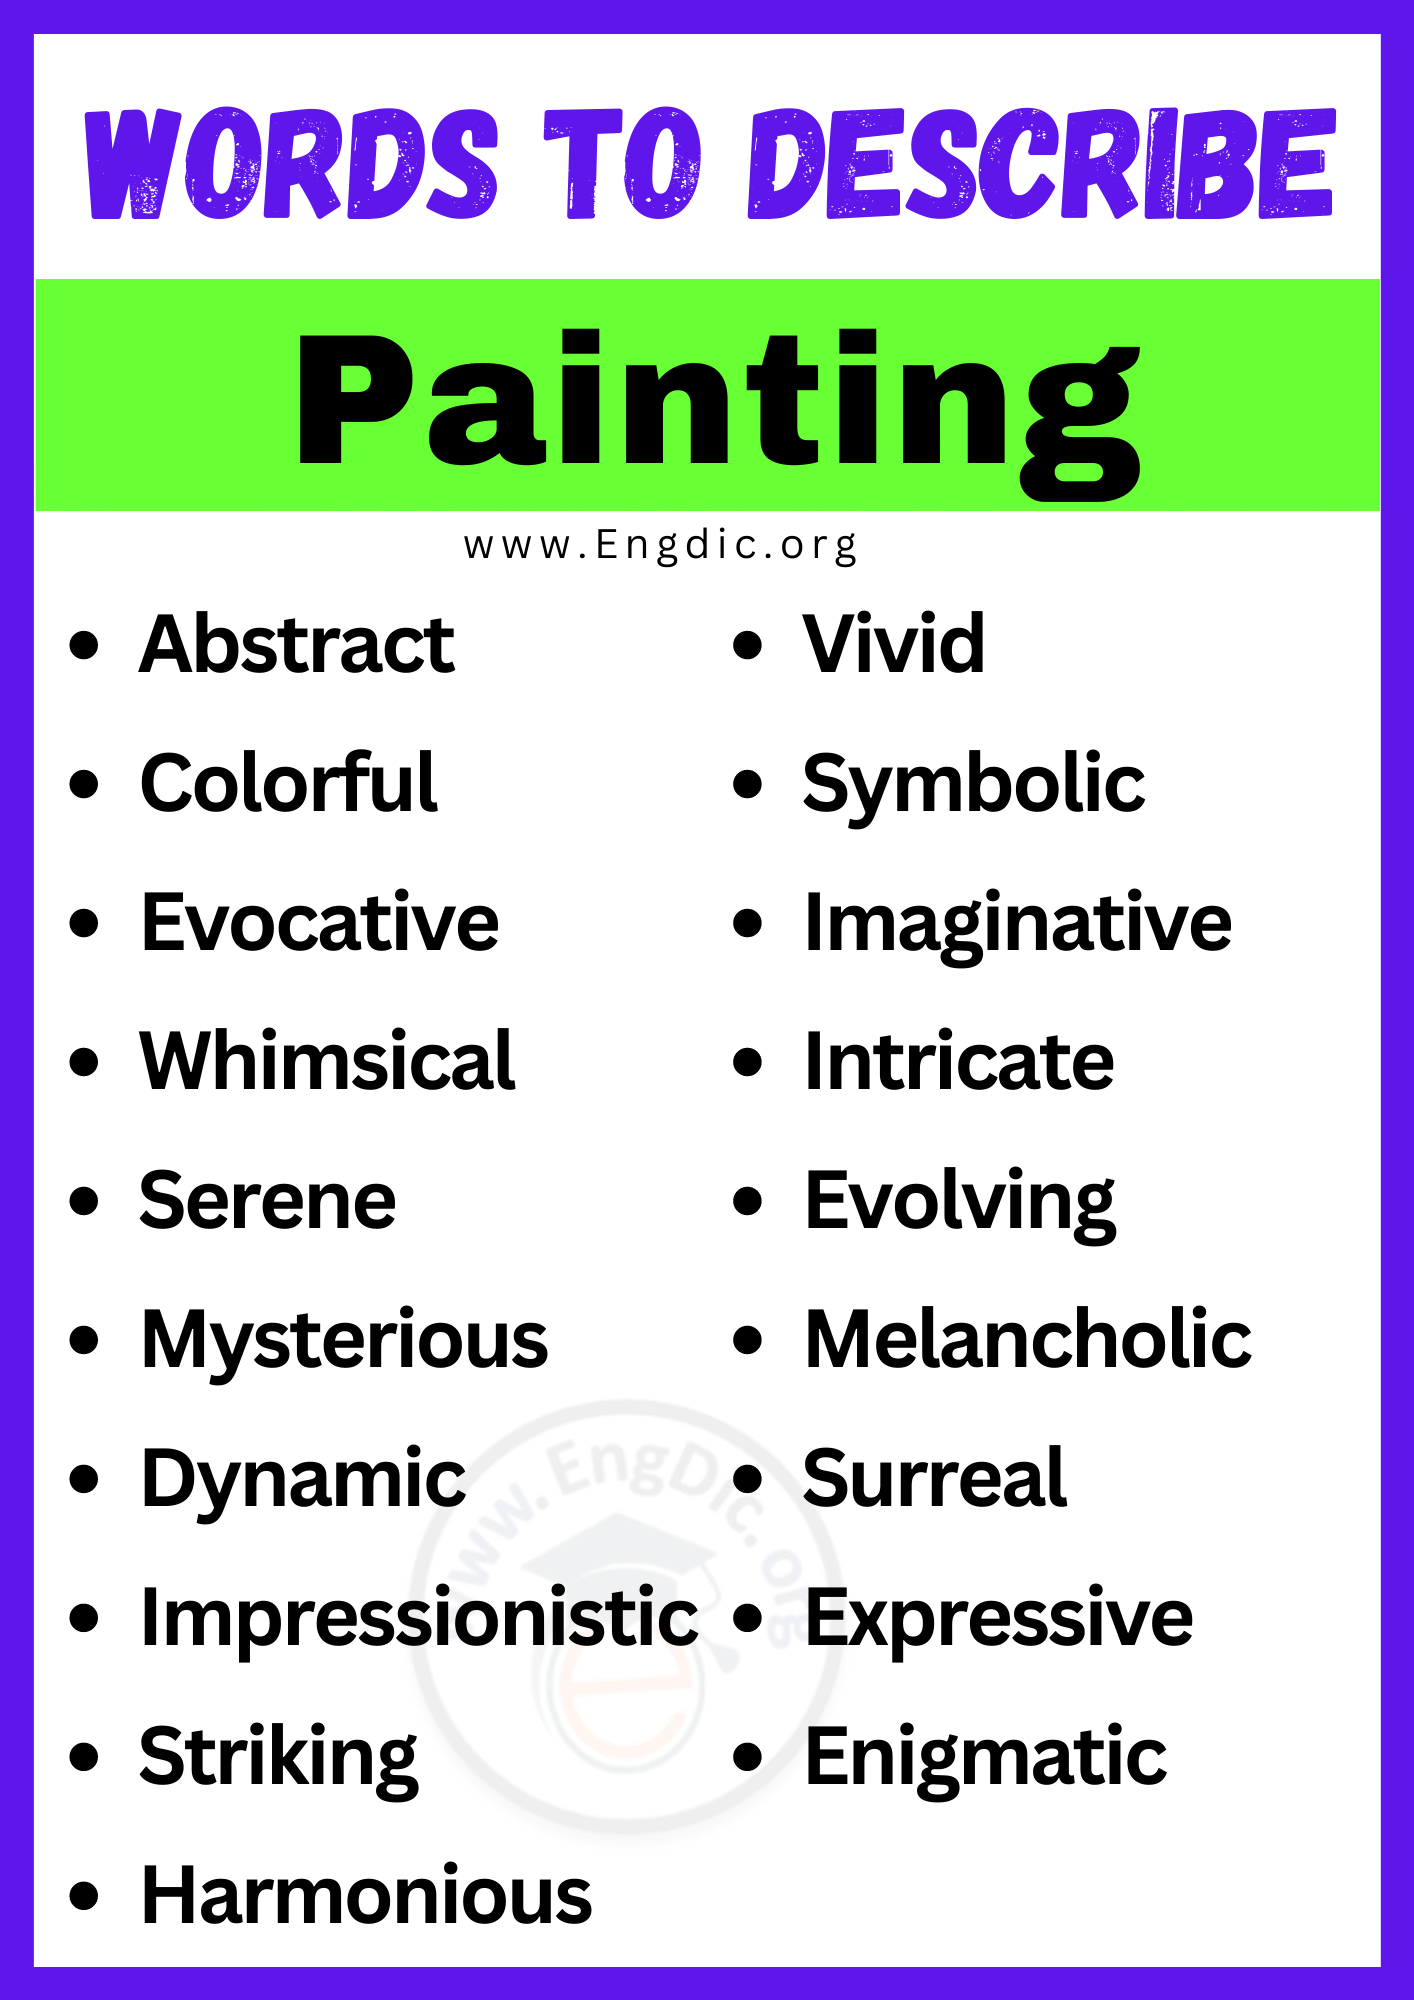 Words to Describe Painting